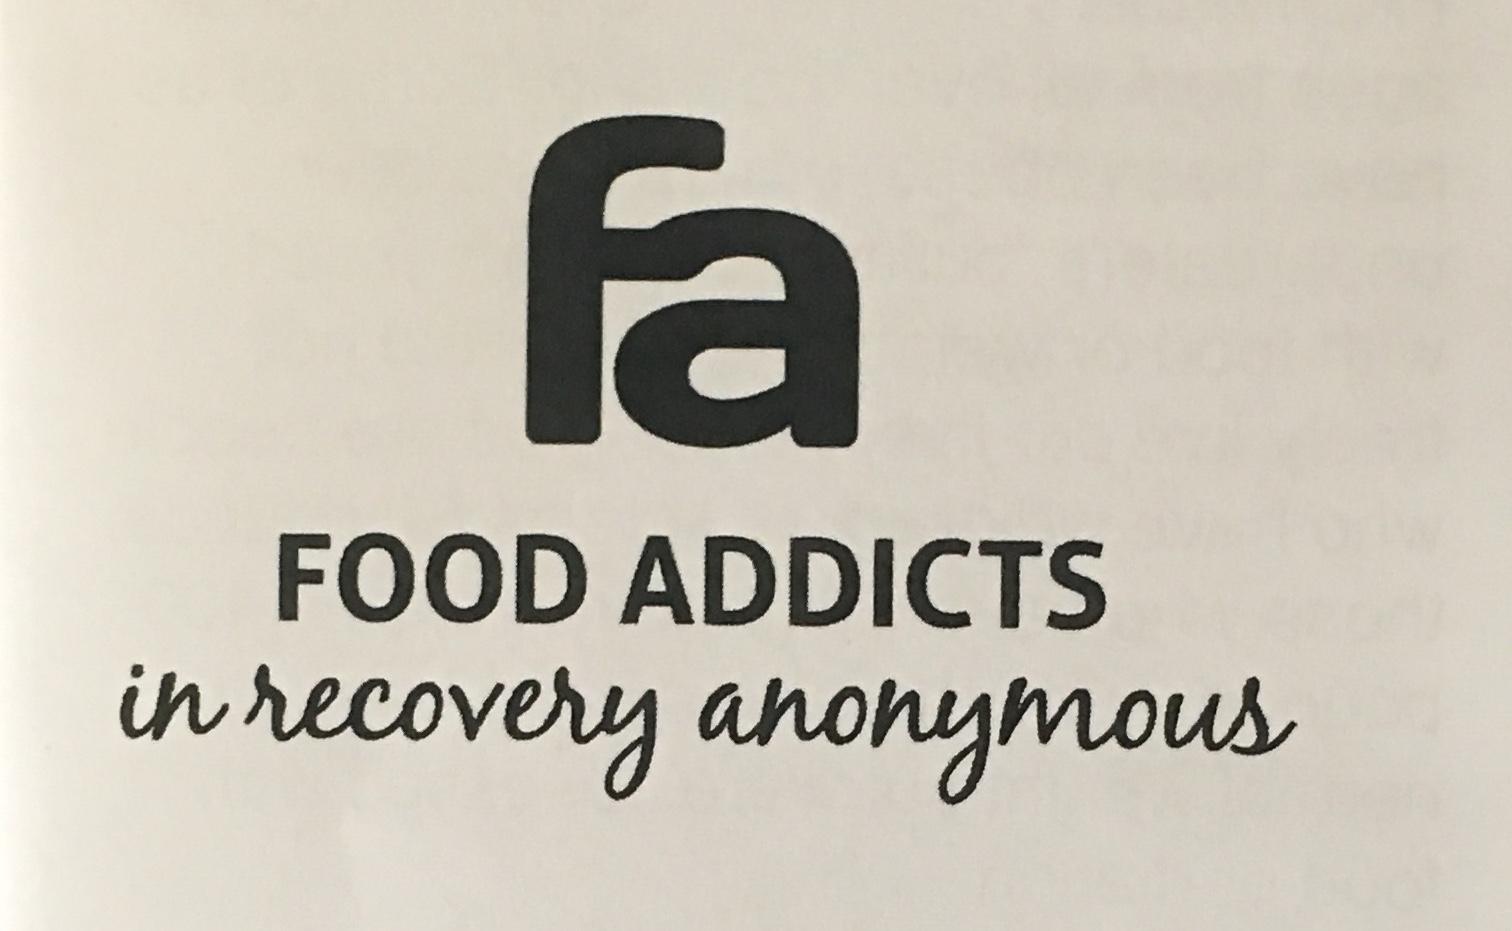 Food Addicts in Recovery Anonymous (FA) Meeting